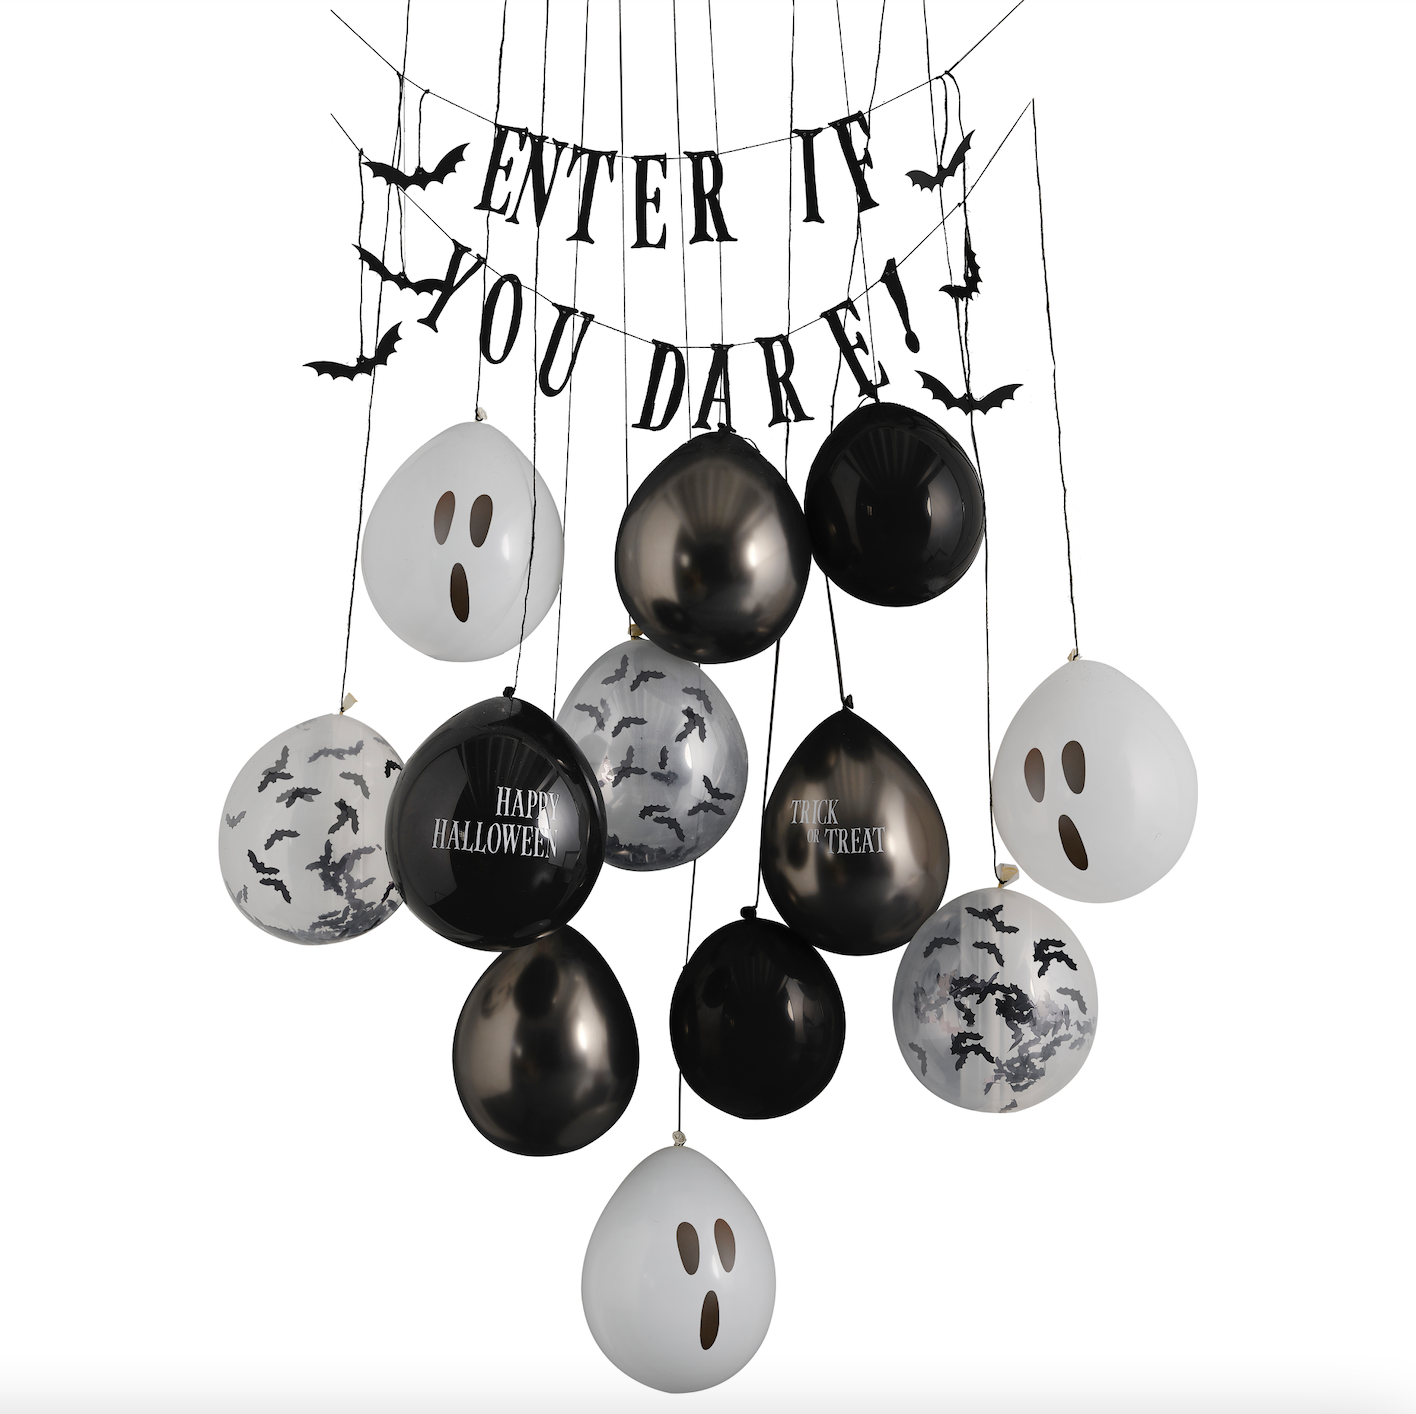 Enter If You Dare Halloween Door Decoration Kit with Balloons, Bunting & Bats